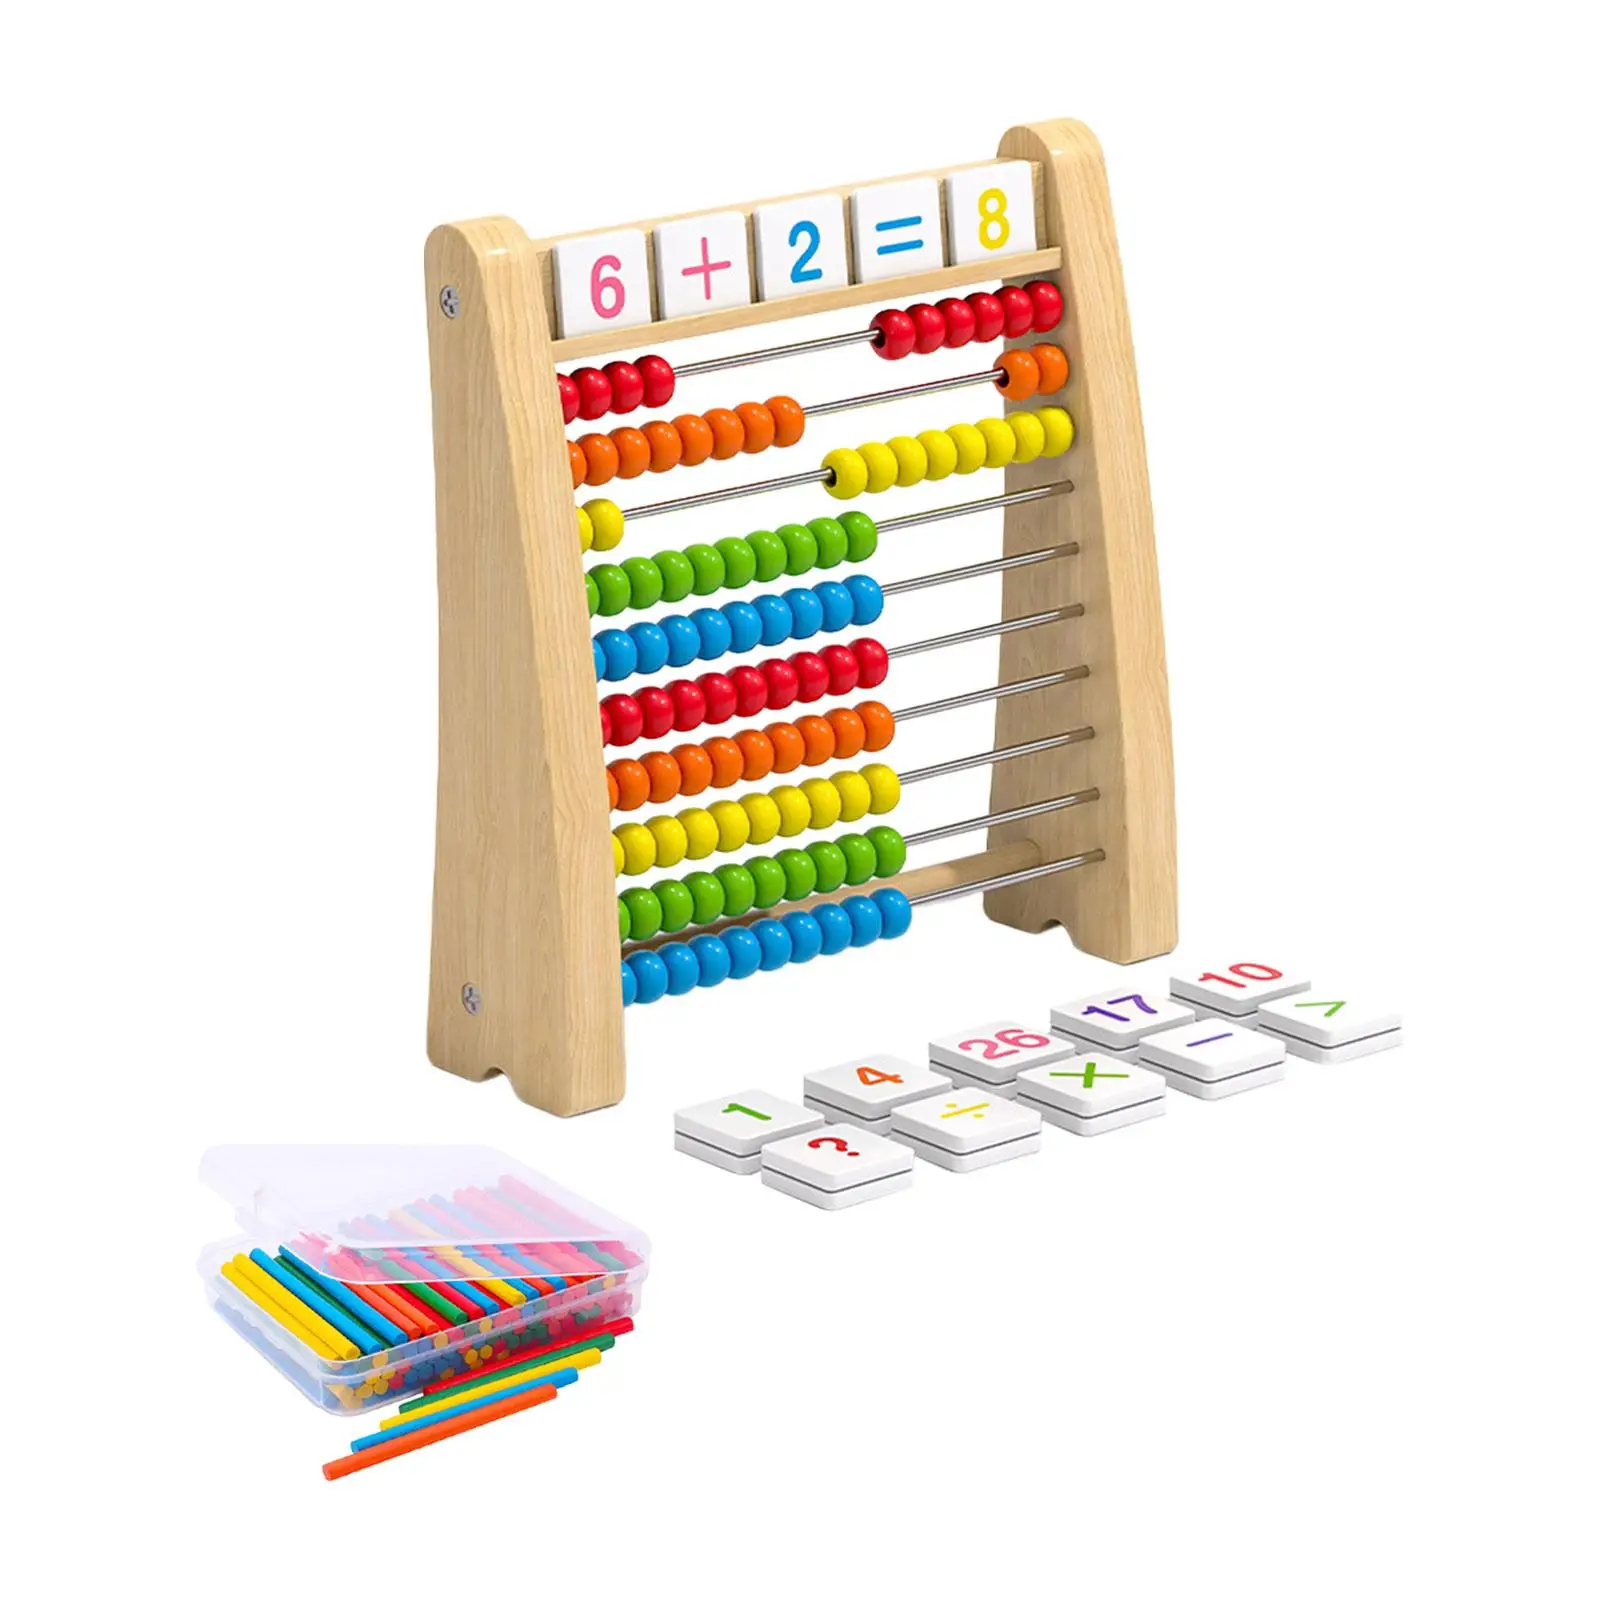 Wooden Abacus Ten Frame Set Educational Counting Frames Toy for Elementary